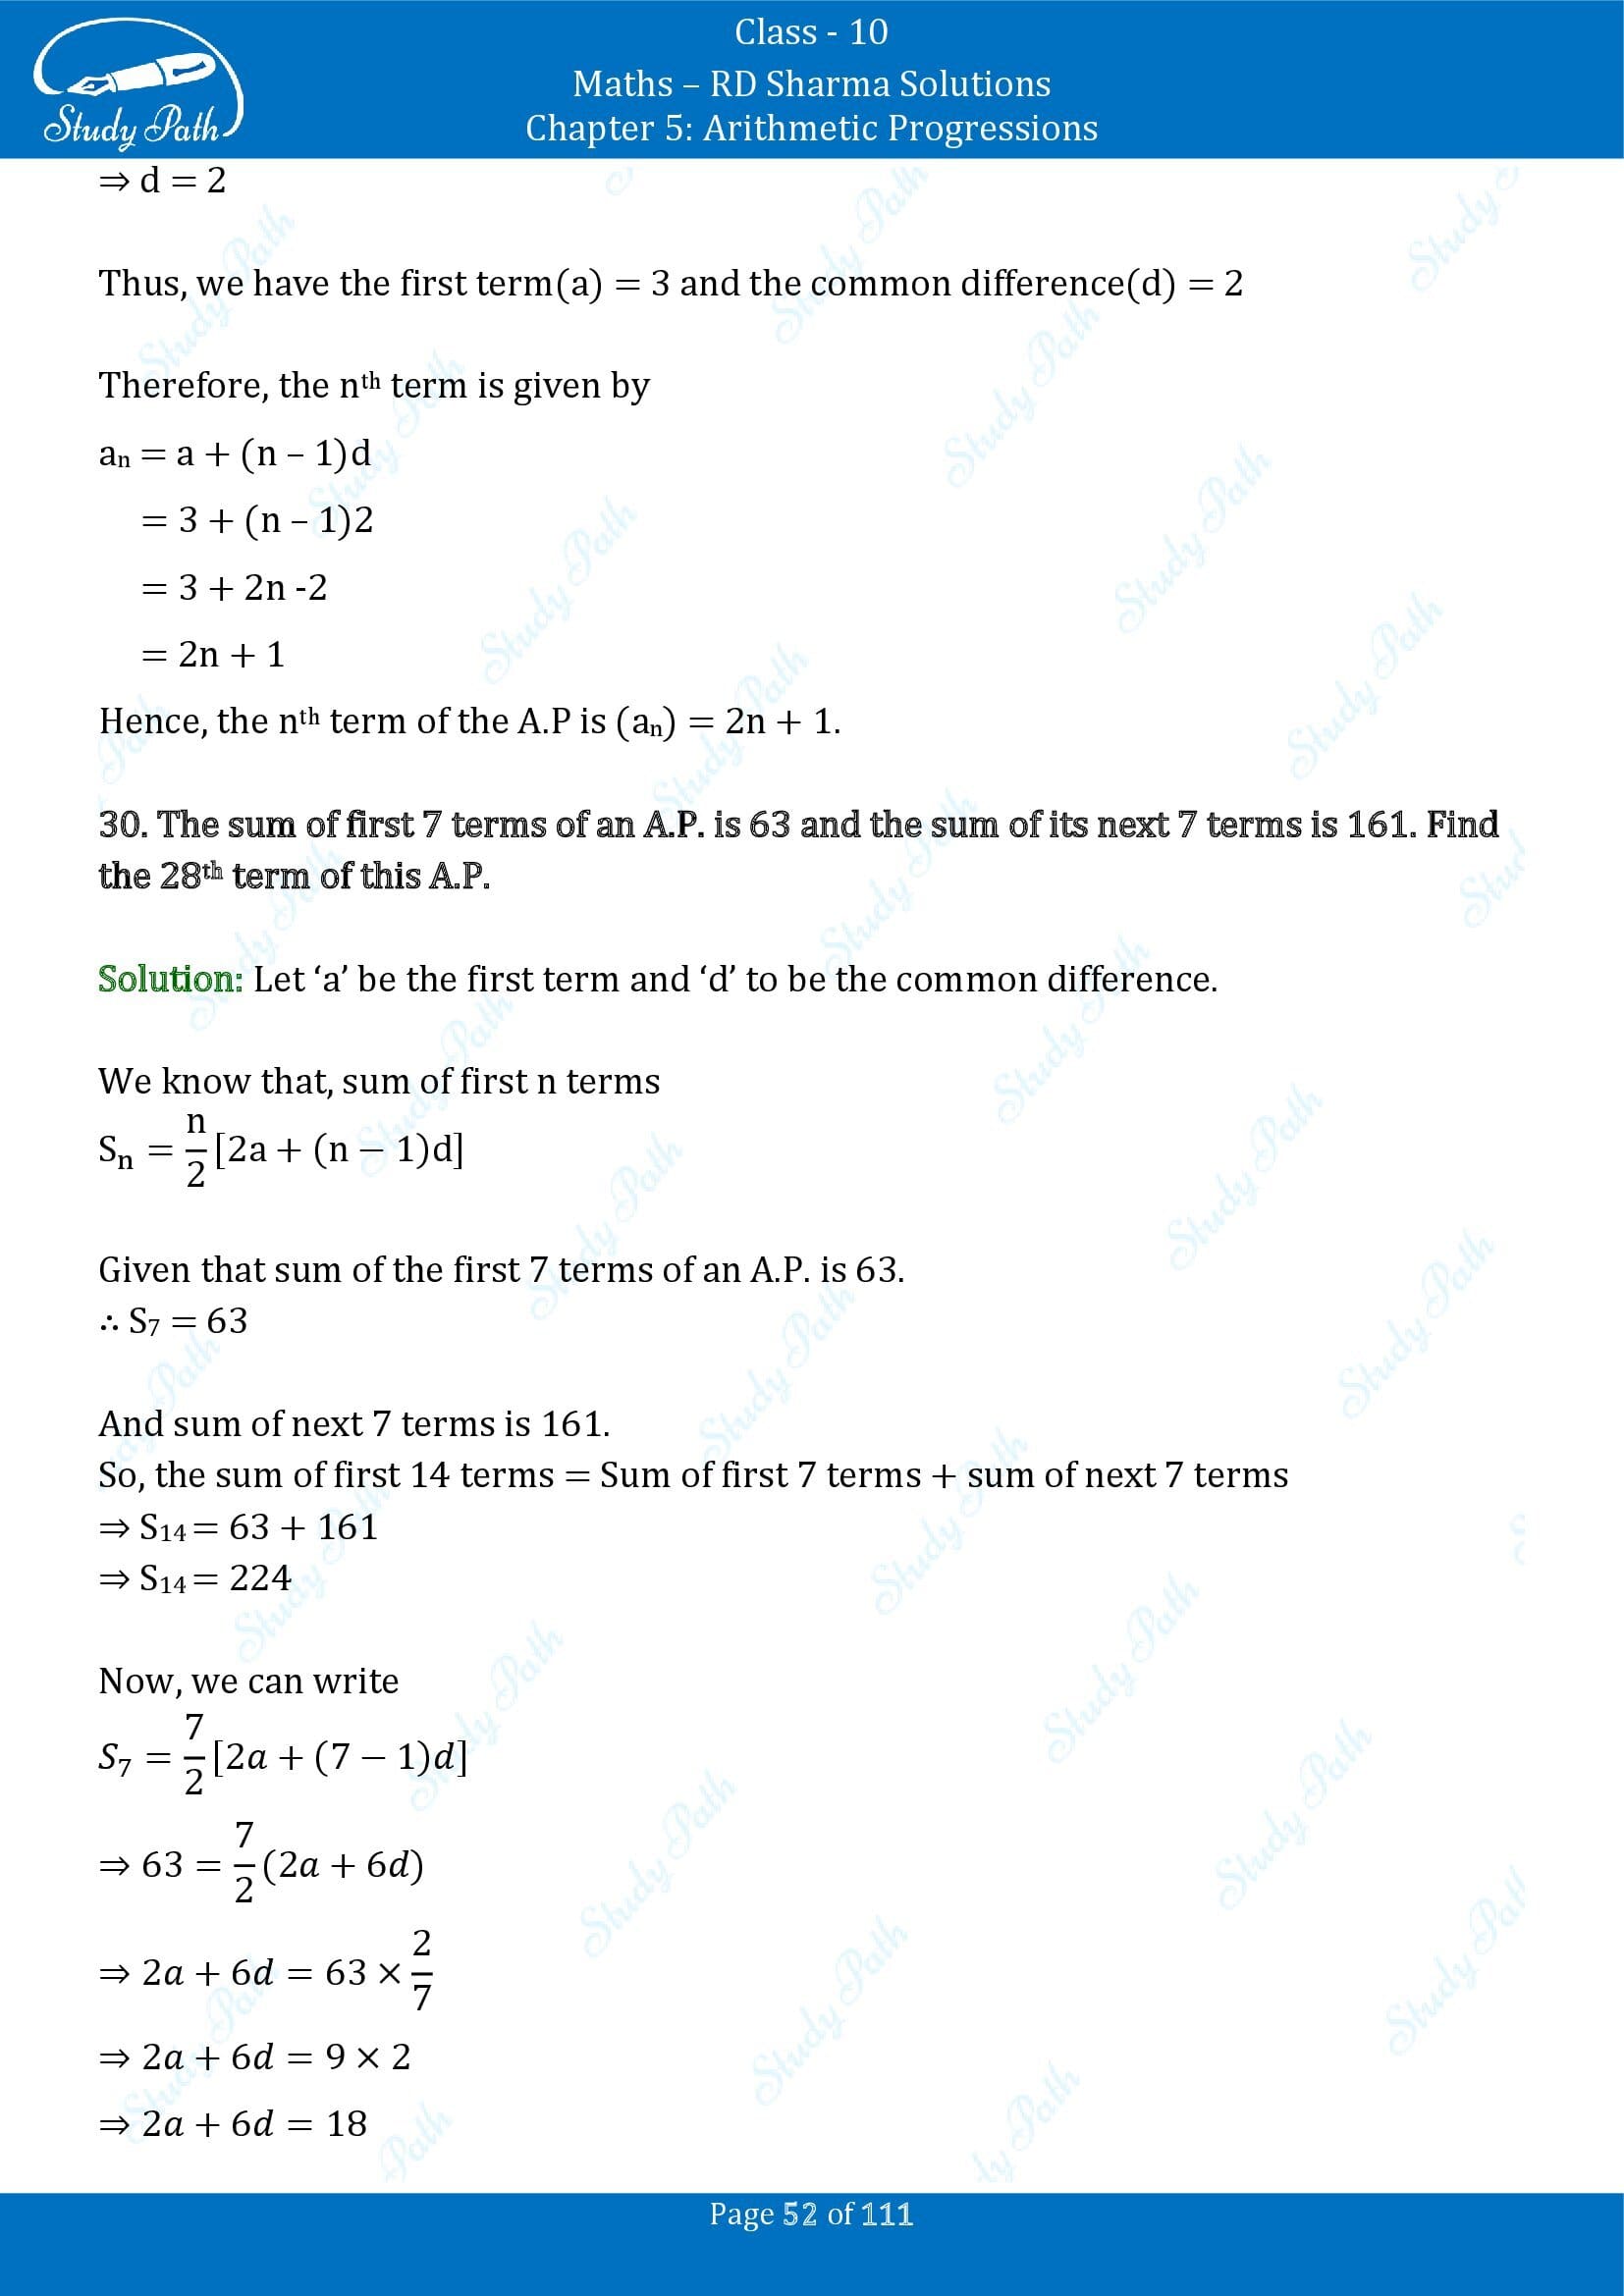 RD Sharma Solutions Class 10 Chapter 5 Arithmetic Progressions Exercise 5.6 00052